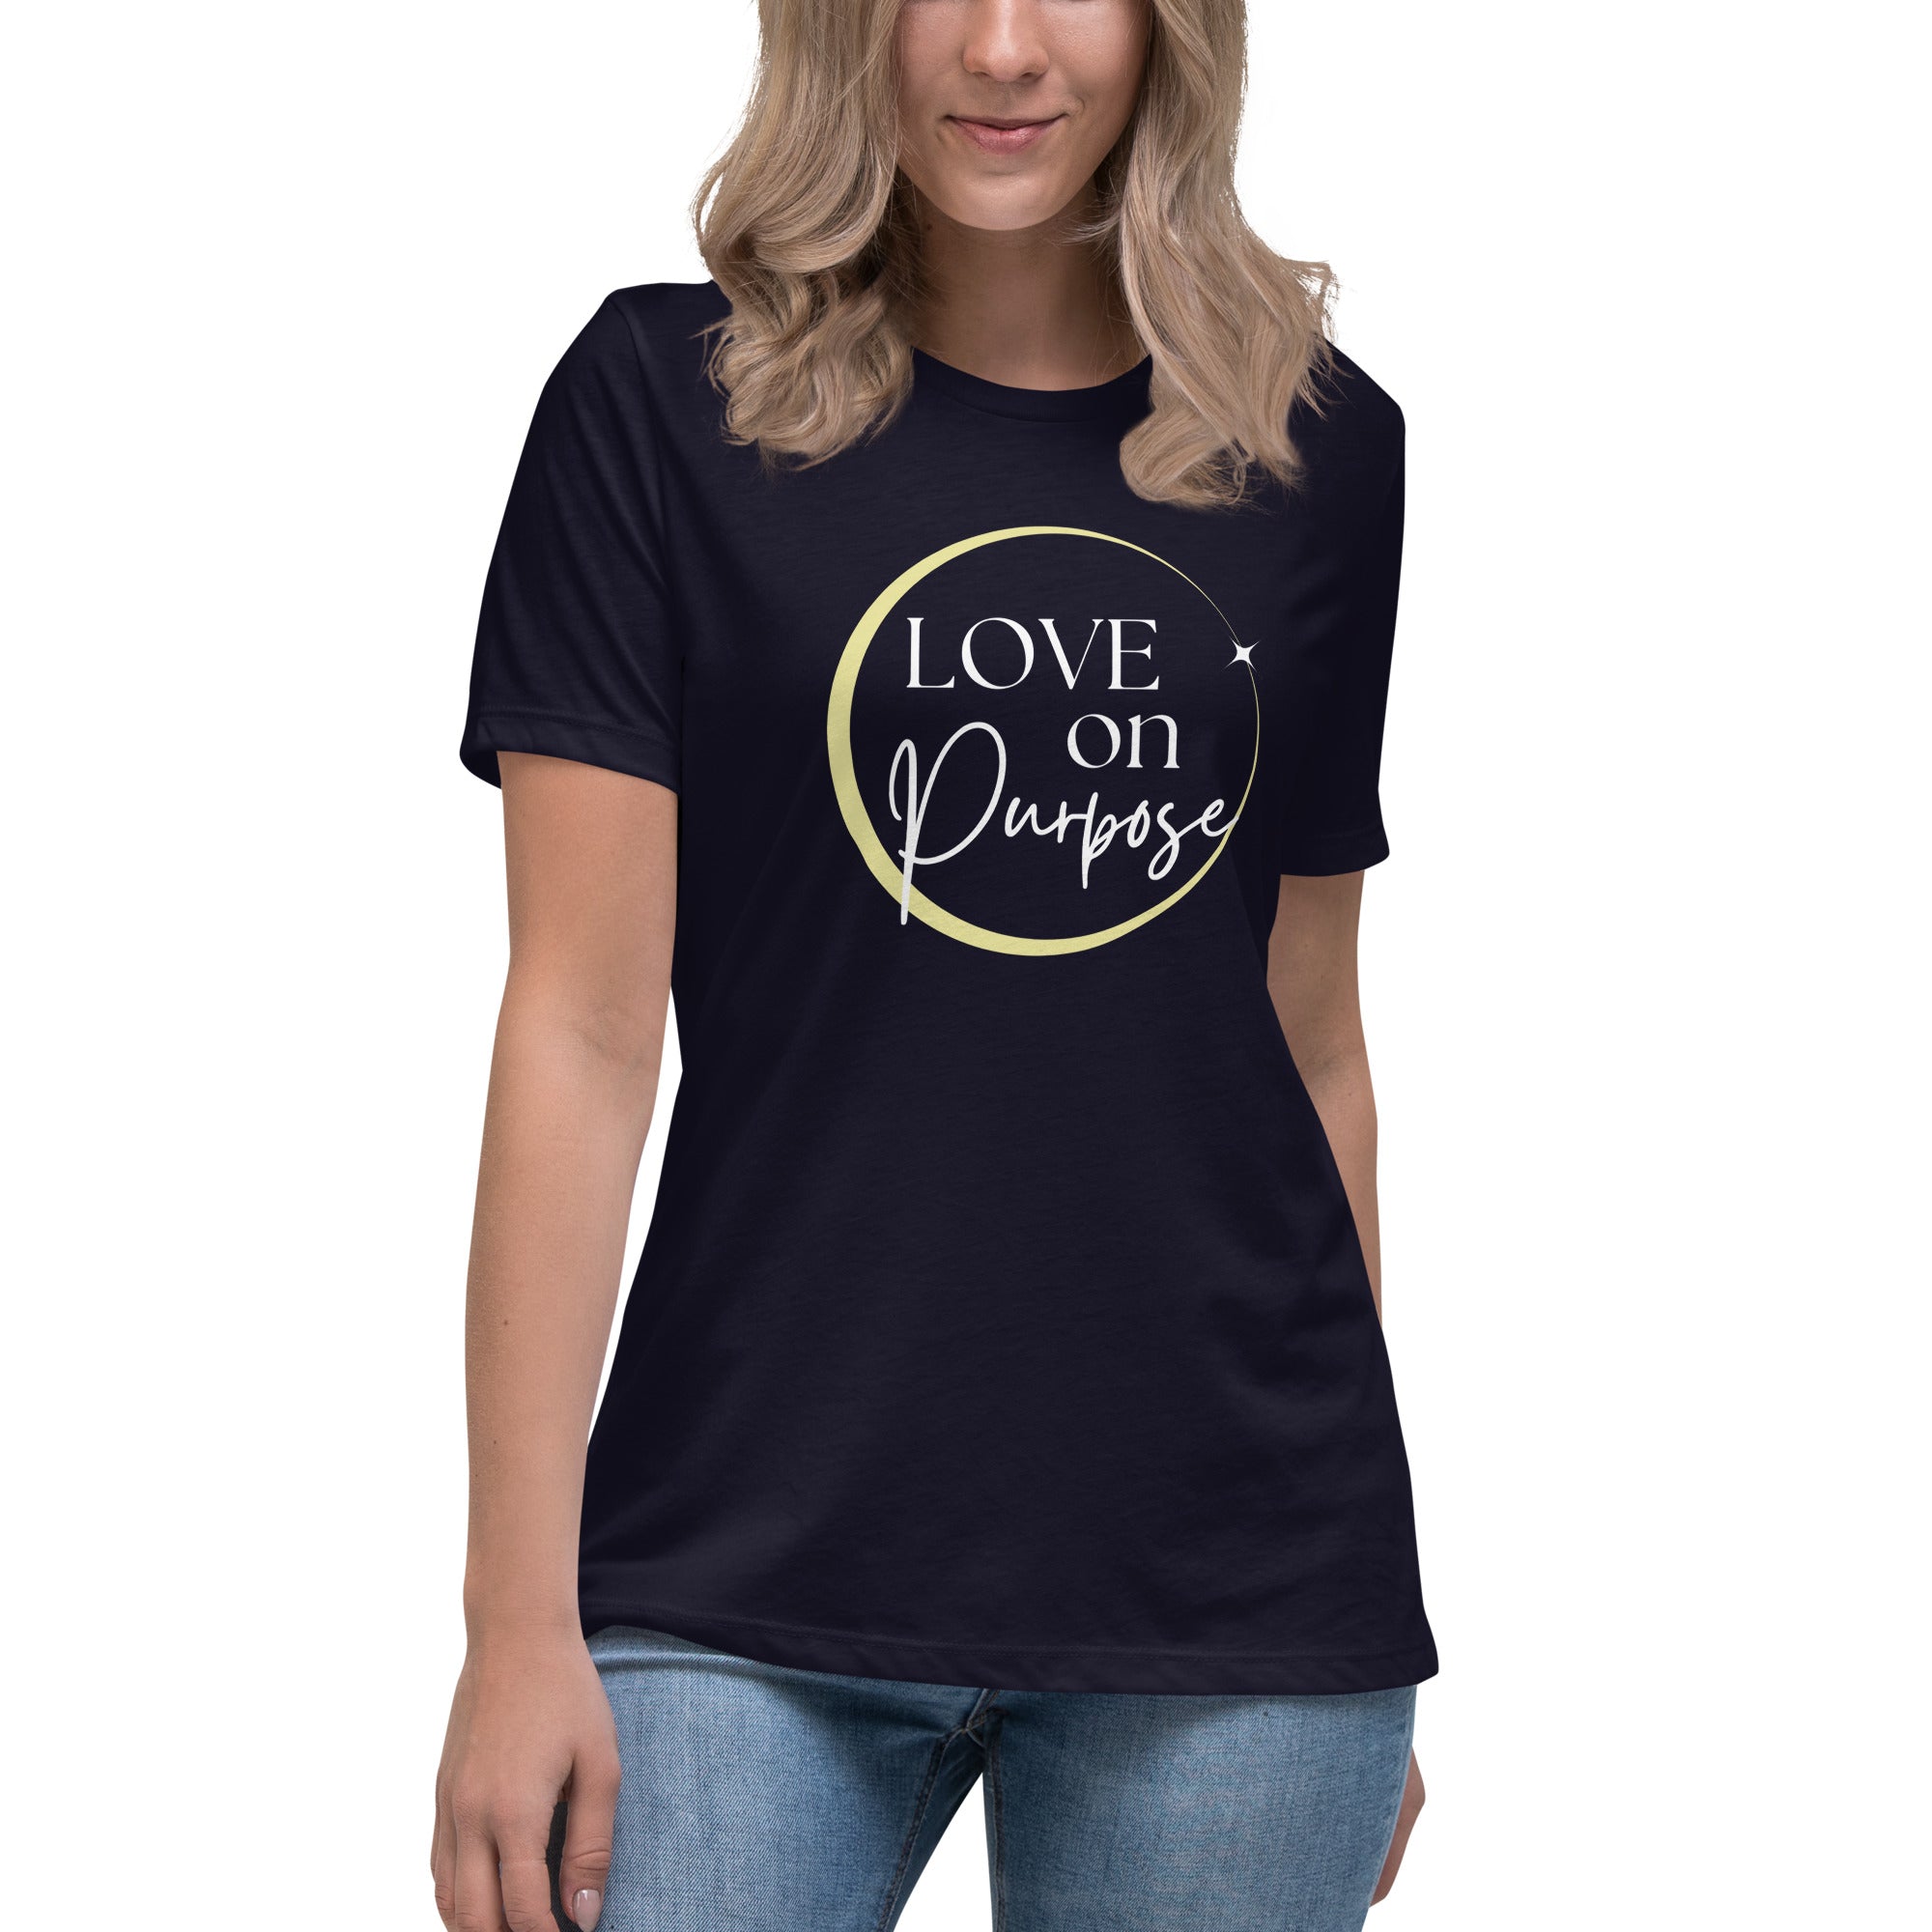 Love on Purpose - Women's Relaxed T-Shirt